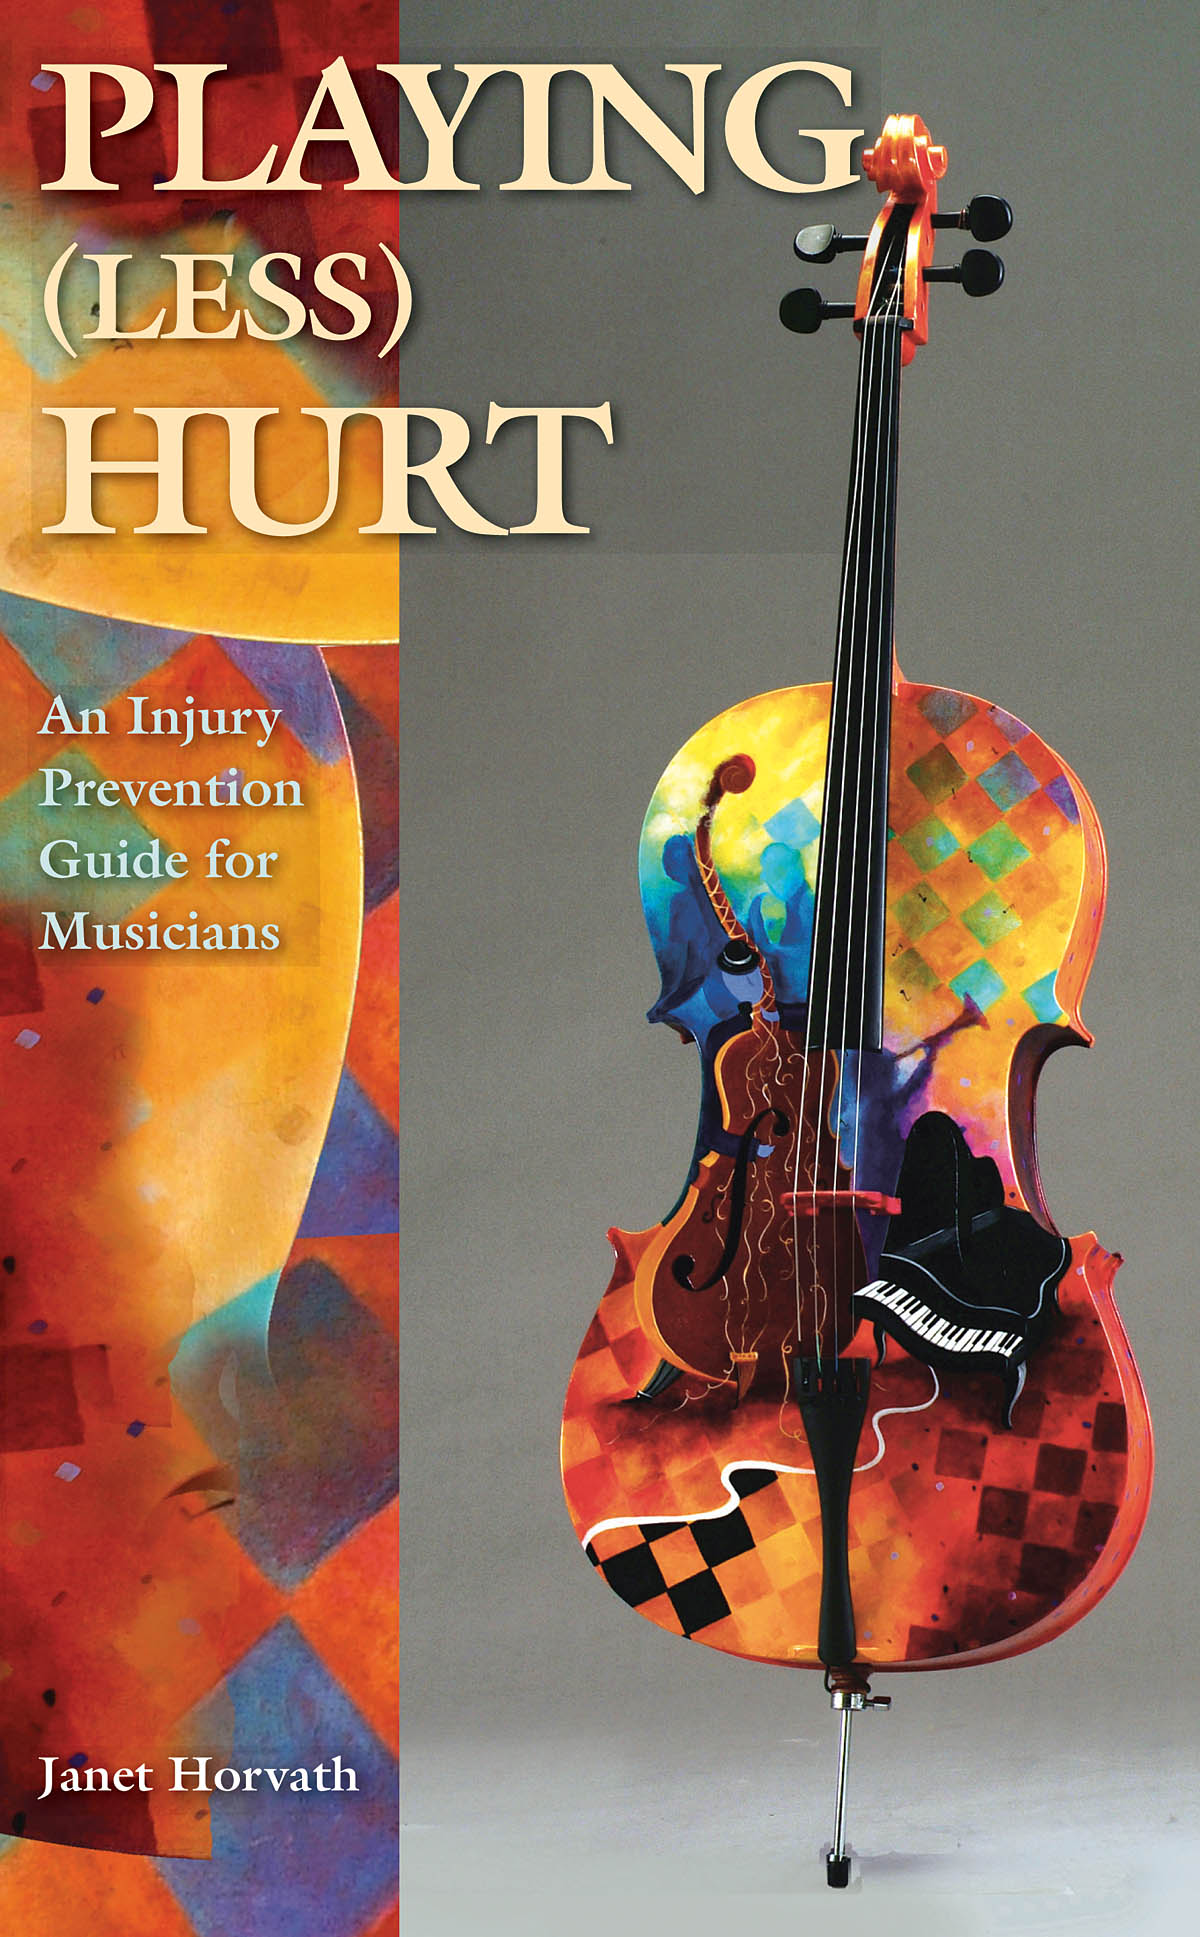 Playing (Less) Hurt: Reference Books: Reference